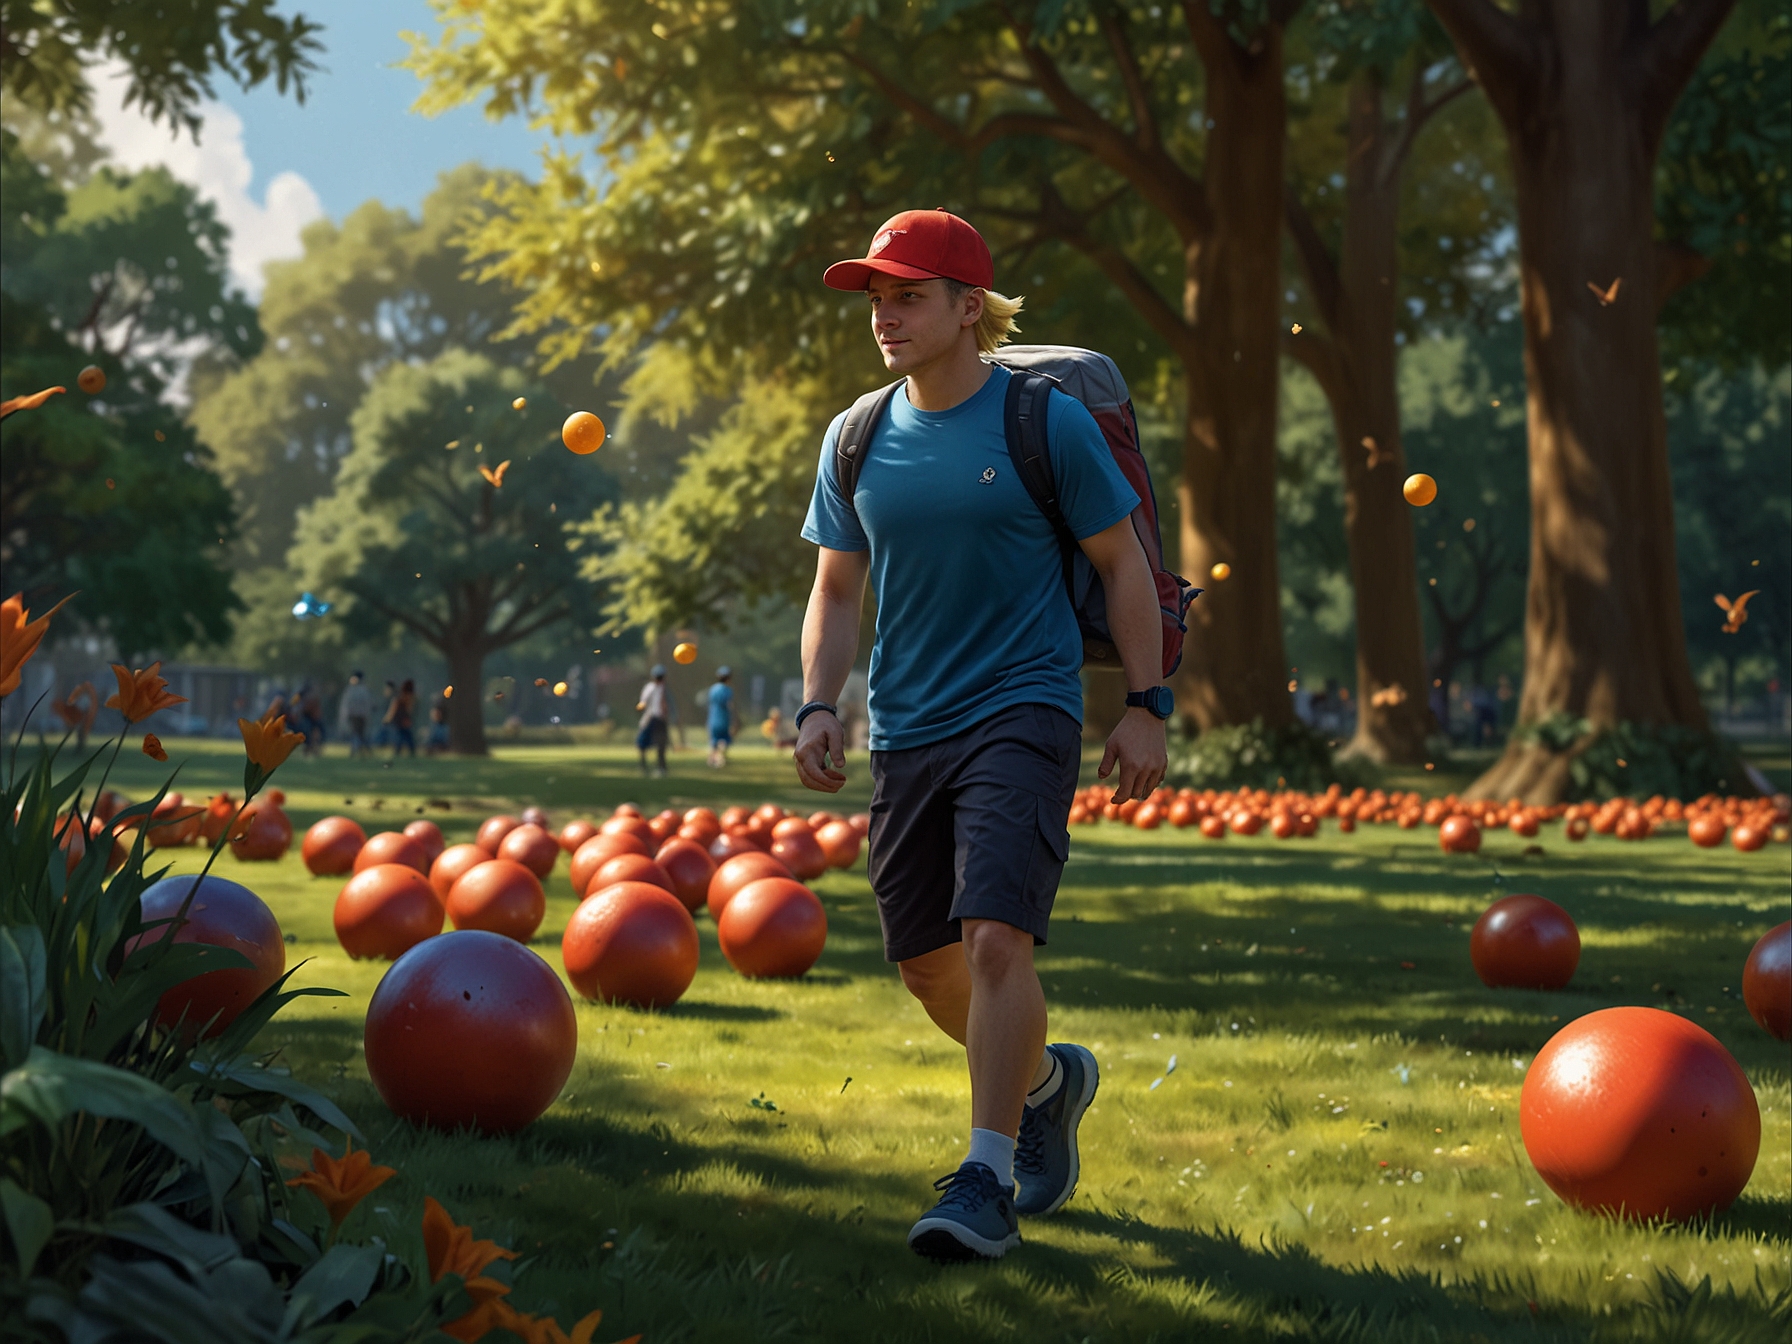 An energetic trainer surrounded by multiple Cyndaquil, showcasing the increased spawn rate during the Community Day Classic. The trainer is seen catching various Cyndaquil with Poké Balls in a vibrant park setting.